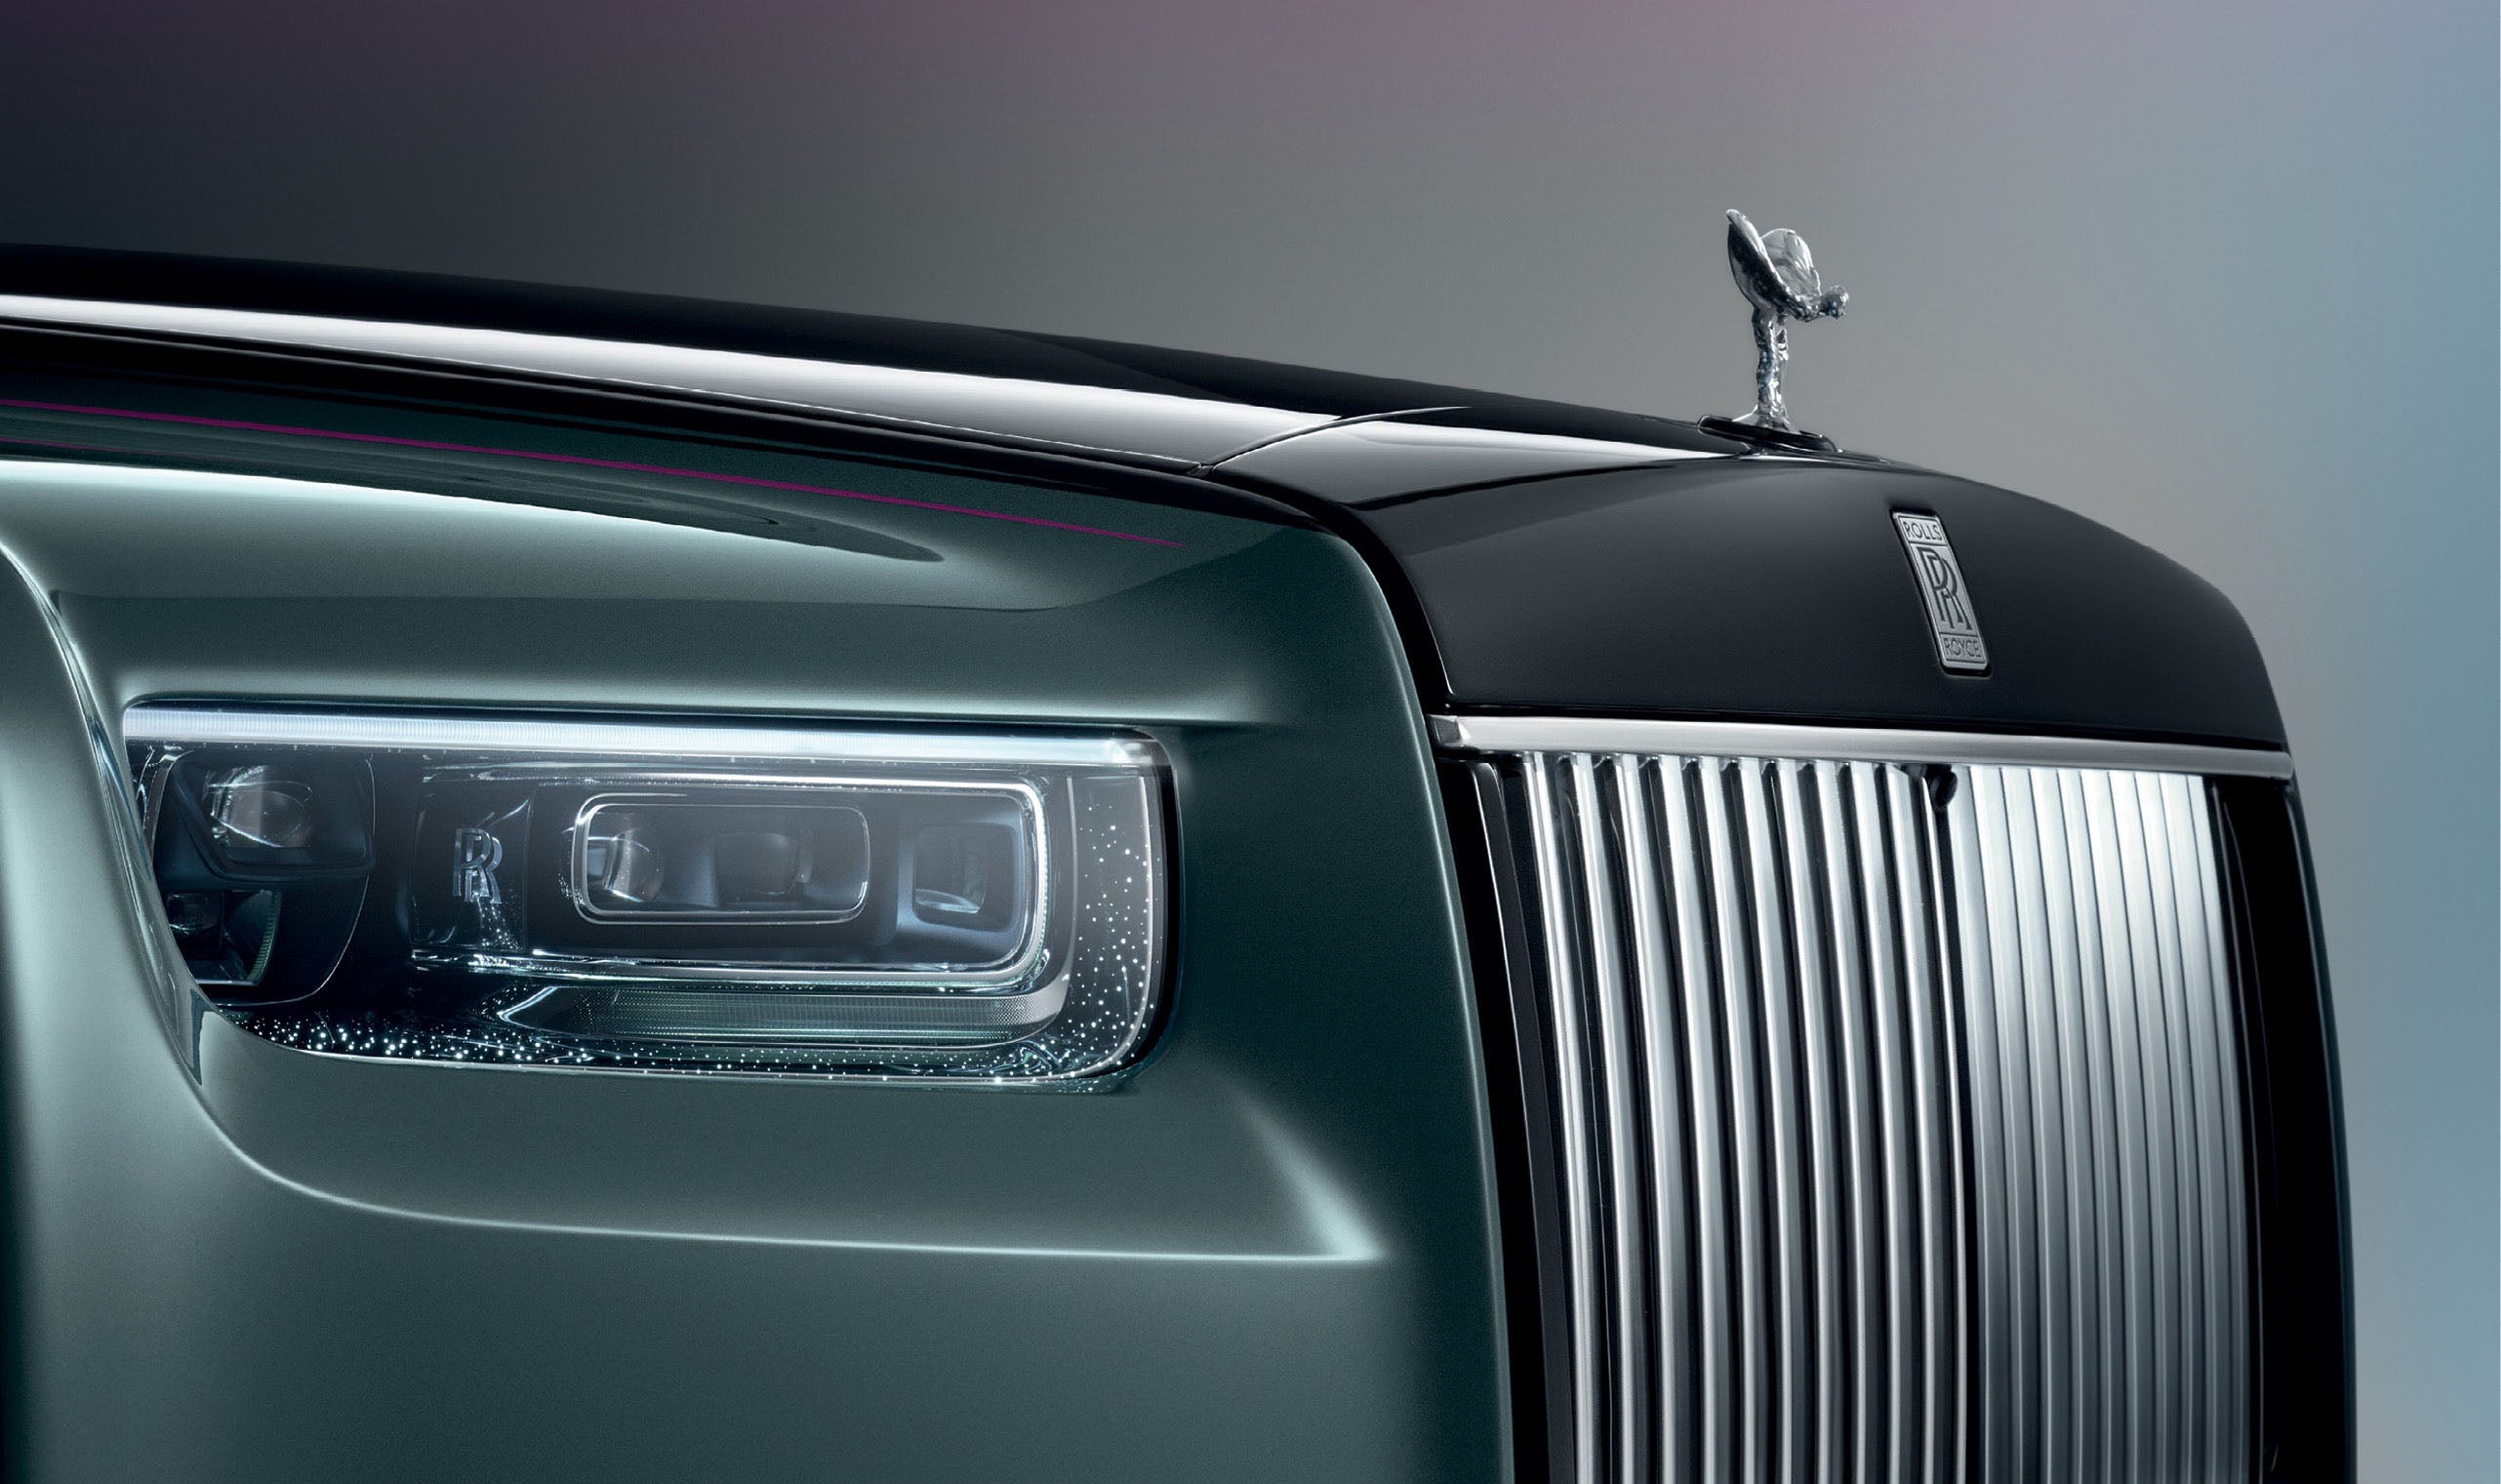 Spirit of Ectasy and Rolls-Royce Pantheon Grille